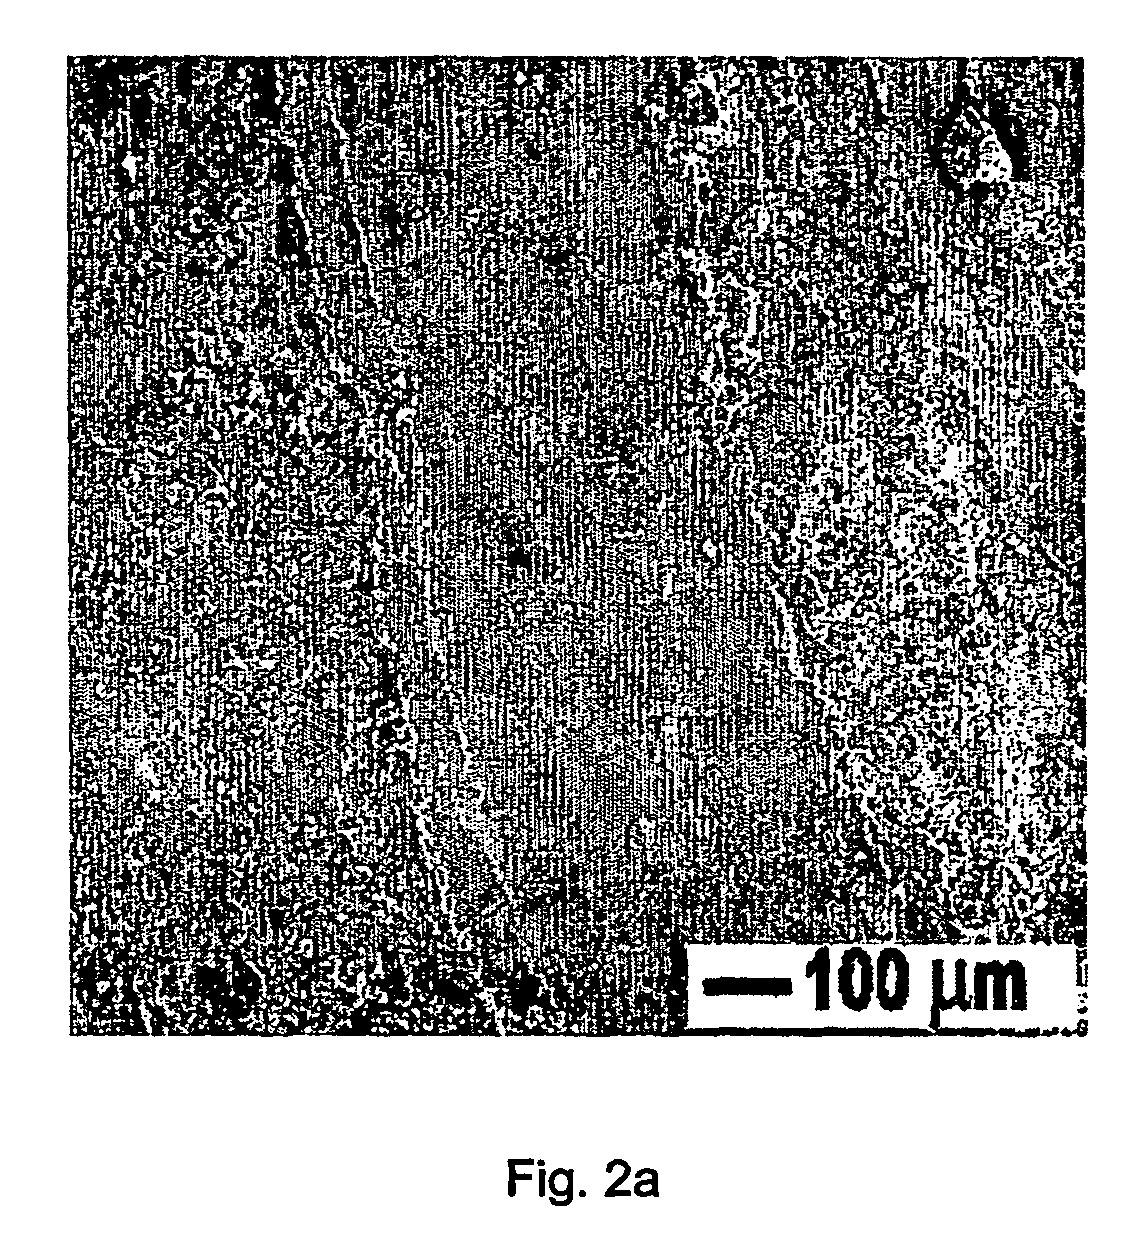 Method for soil remediation and engineering